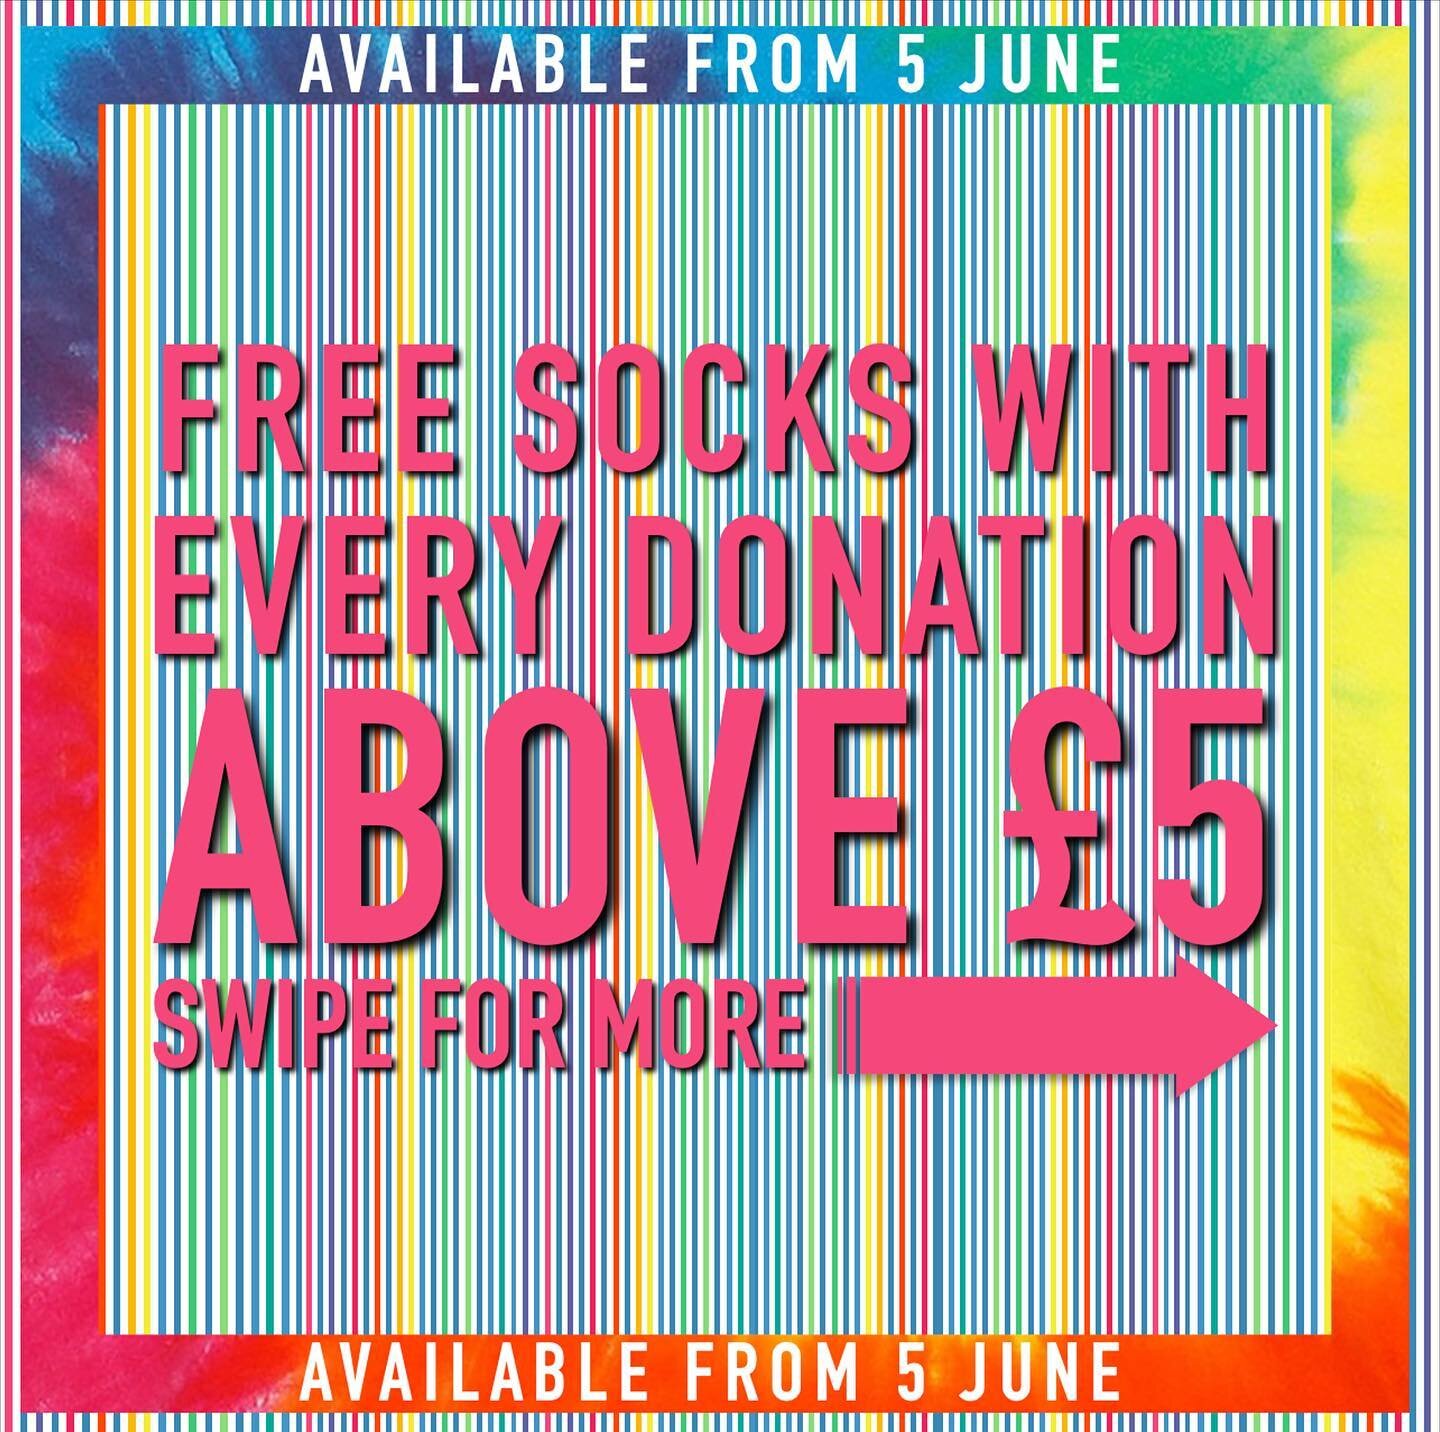 This Sunday marks the second anniversary of Si&ocirc;n&rsquo;s passing. To #CelebraSi&ocirc;n we are giving everyone who donates over &pound;5 a pair of Tie-Dye Socks and for donations over &pound;15 a Tie Dye T-Shirt as a reminder of the colourful l